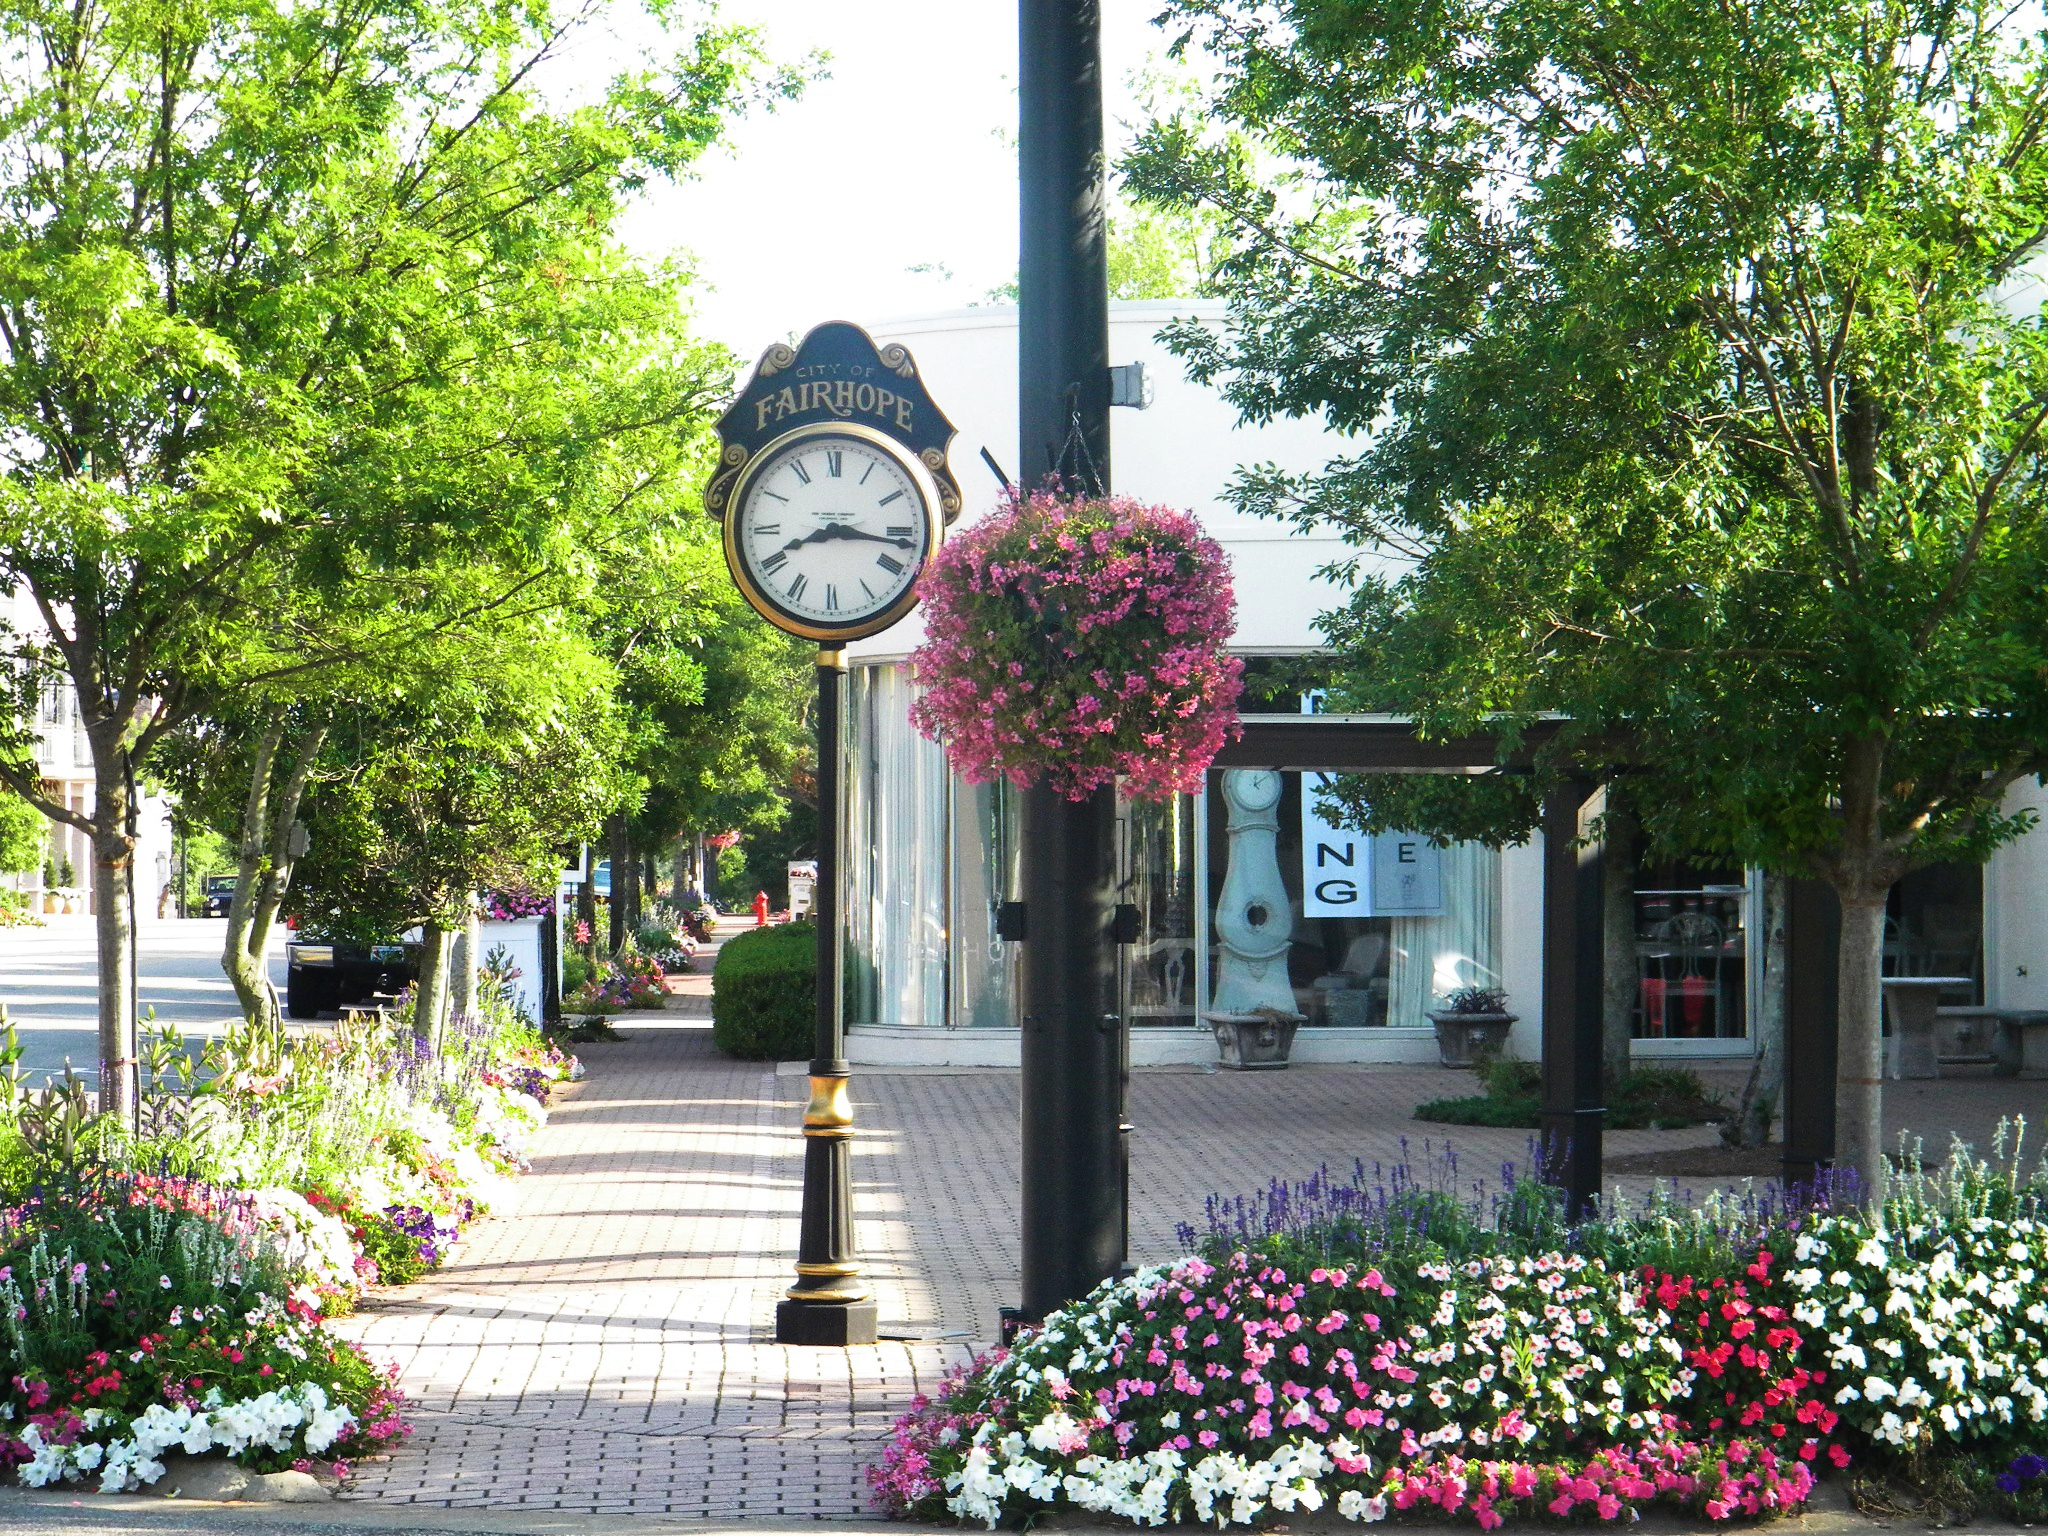 Things To Do In Fairhope, Alabama